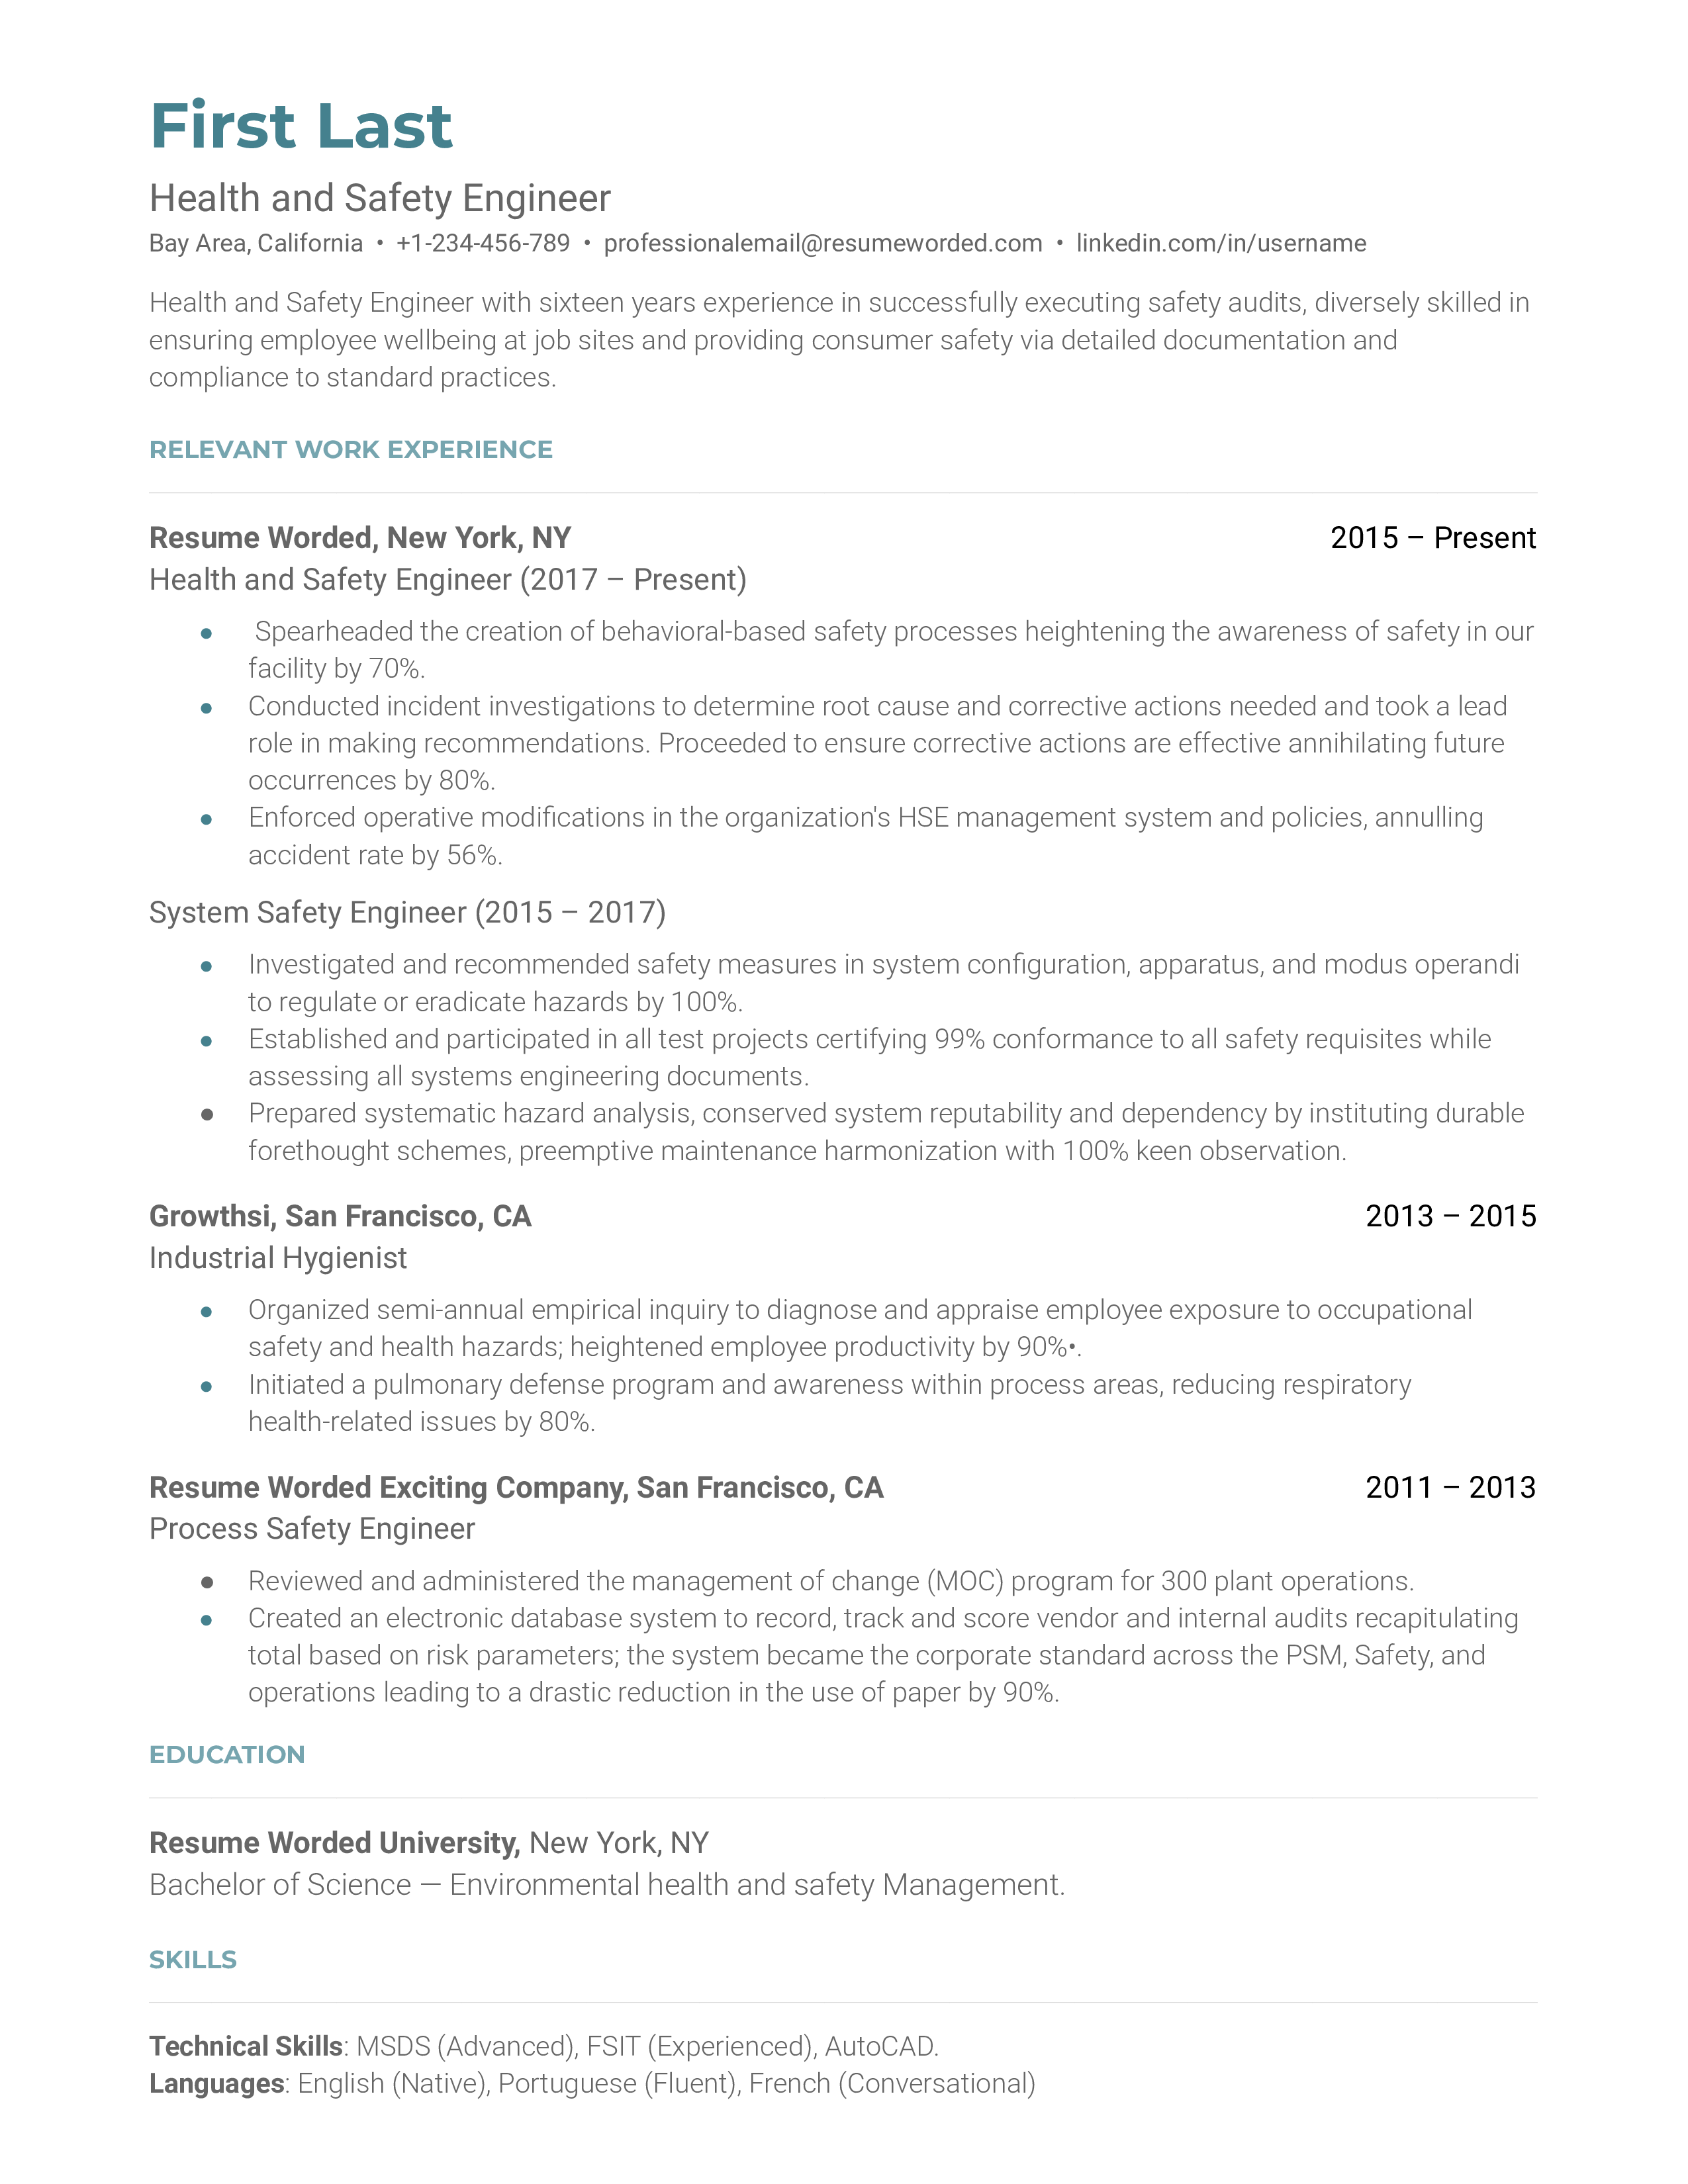 Screenshot of a CV for a Health and Safety Engineer role.